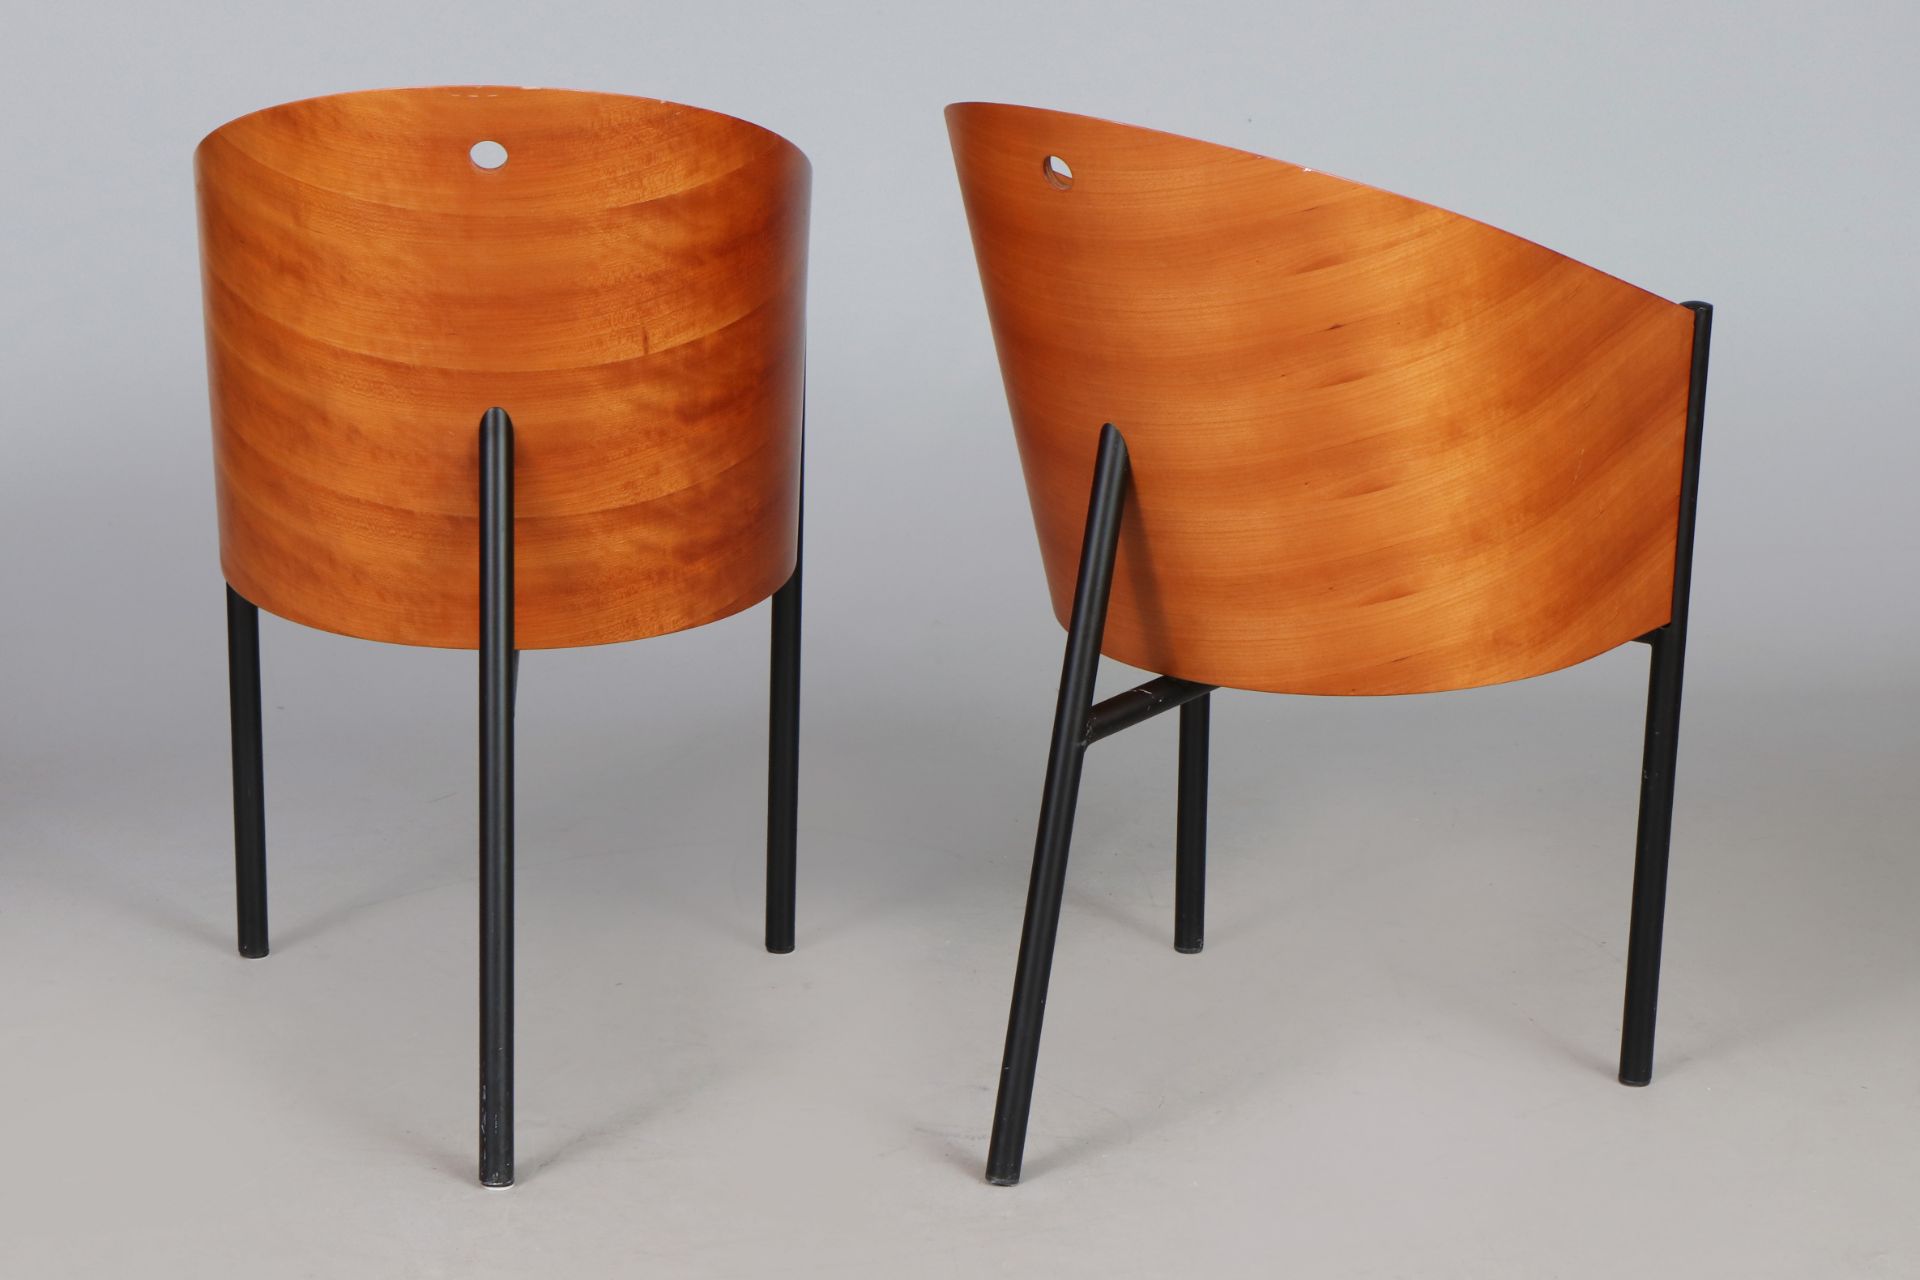 4 PHILIPPE STARCK (1949) Stühle ¨Costes¨ - Image 3 of 4